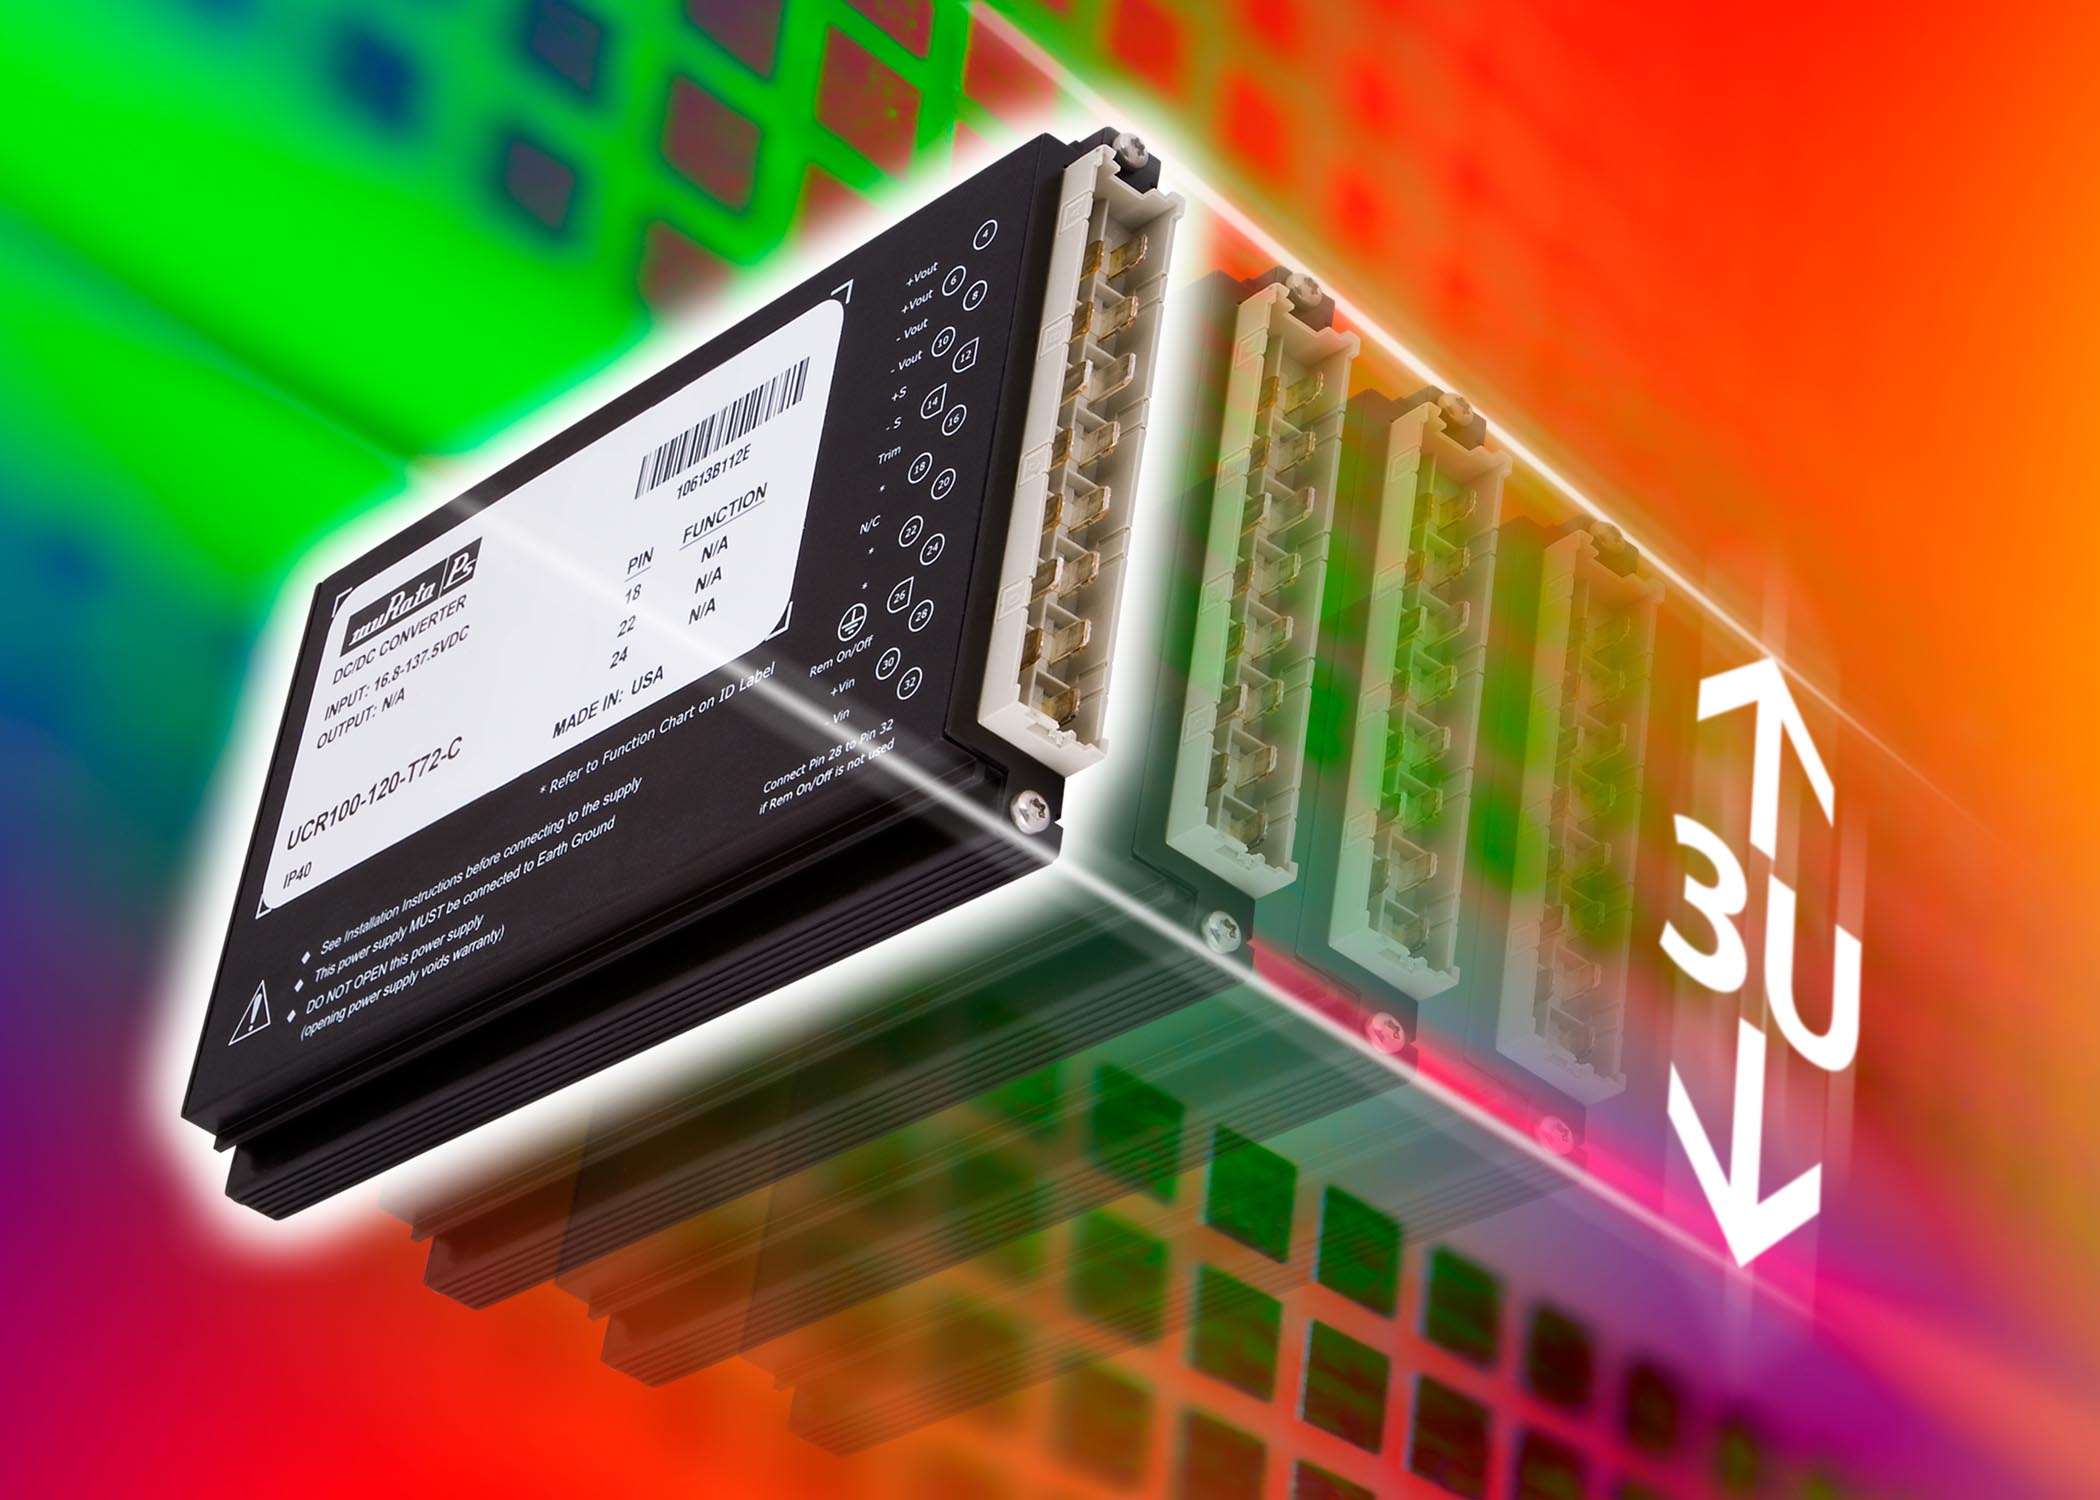 Murata launches UCR100 series of DC-DC converters